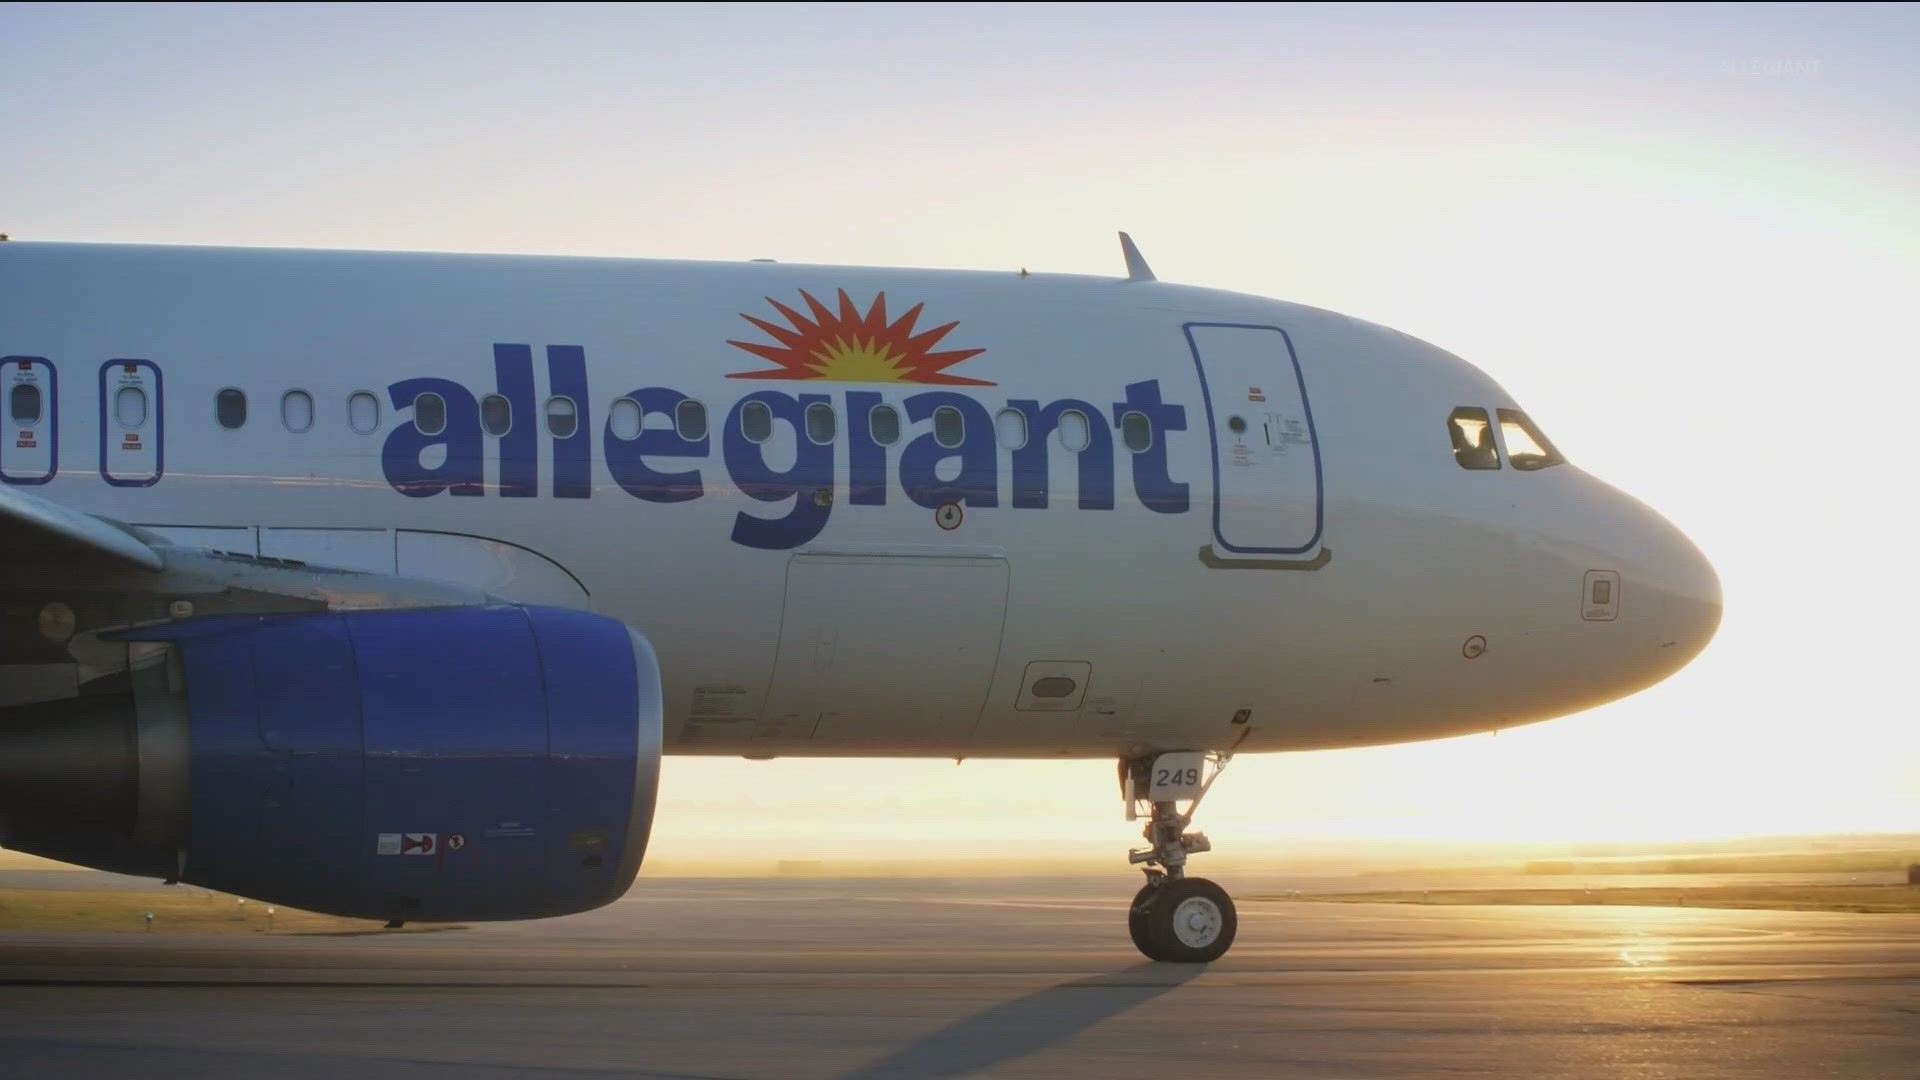 Allegiant claims that LoneStar Airport Holdings has been making deals in secret, affecting the airline's operations.